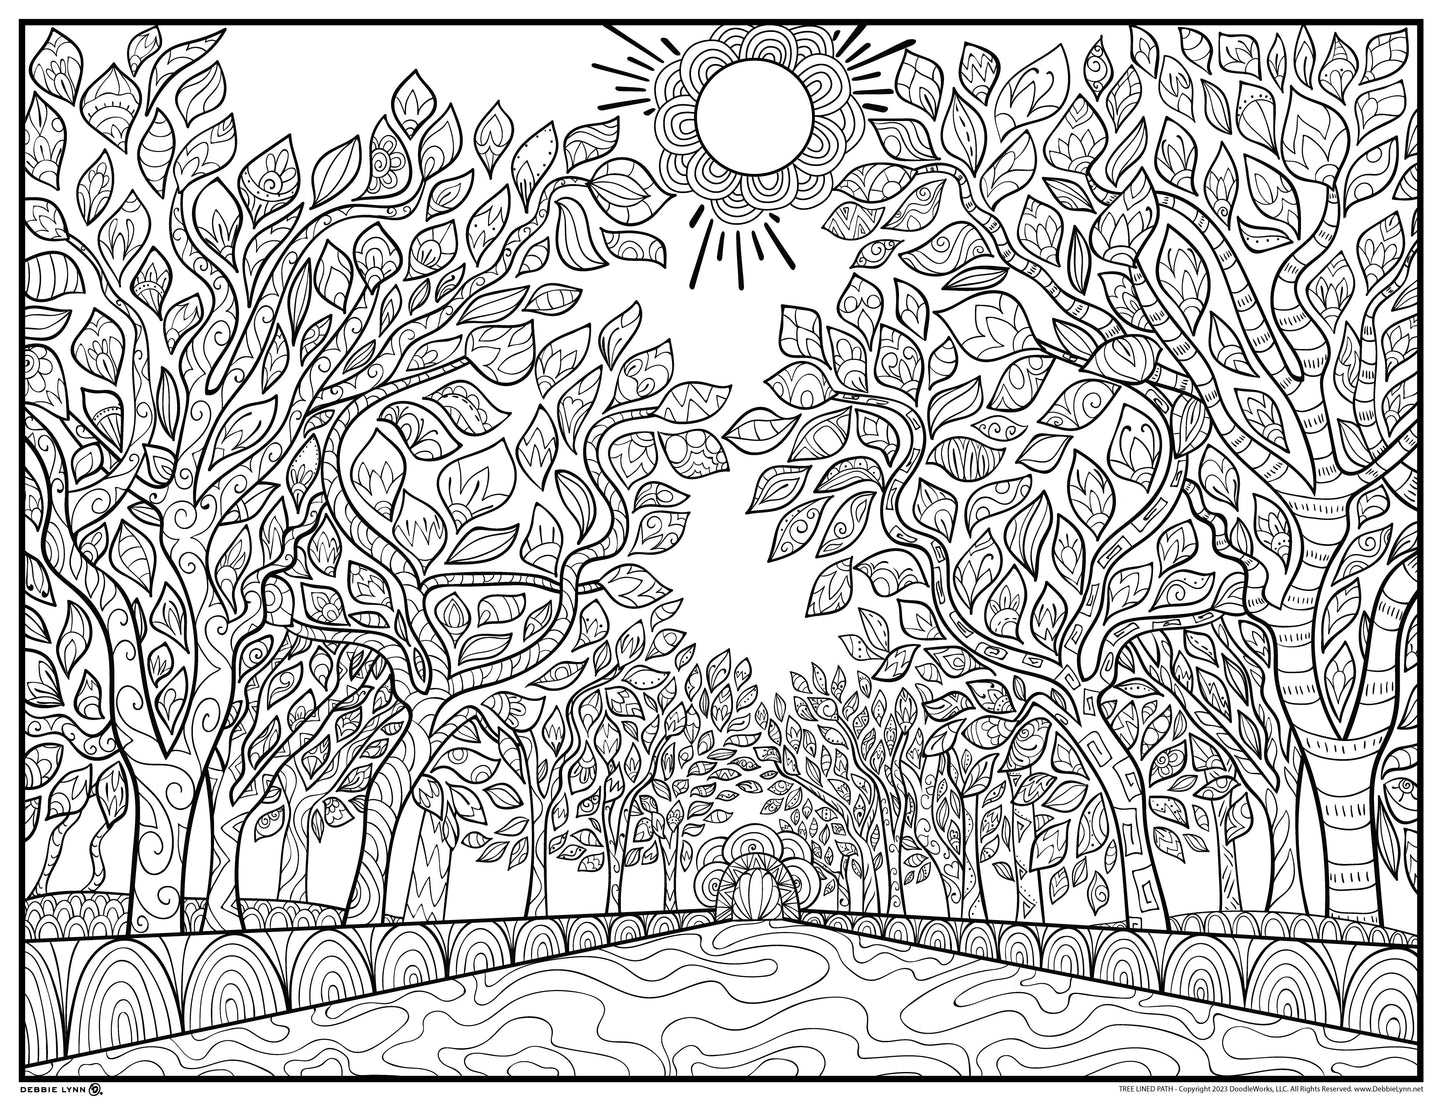 Tree Lined Path Personalized Giant Coloring Poster 46"x60"